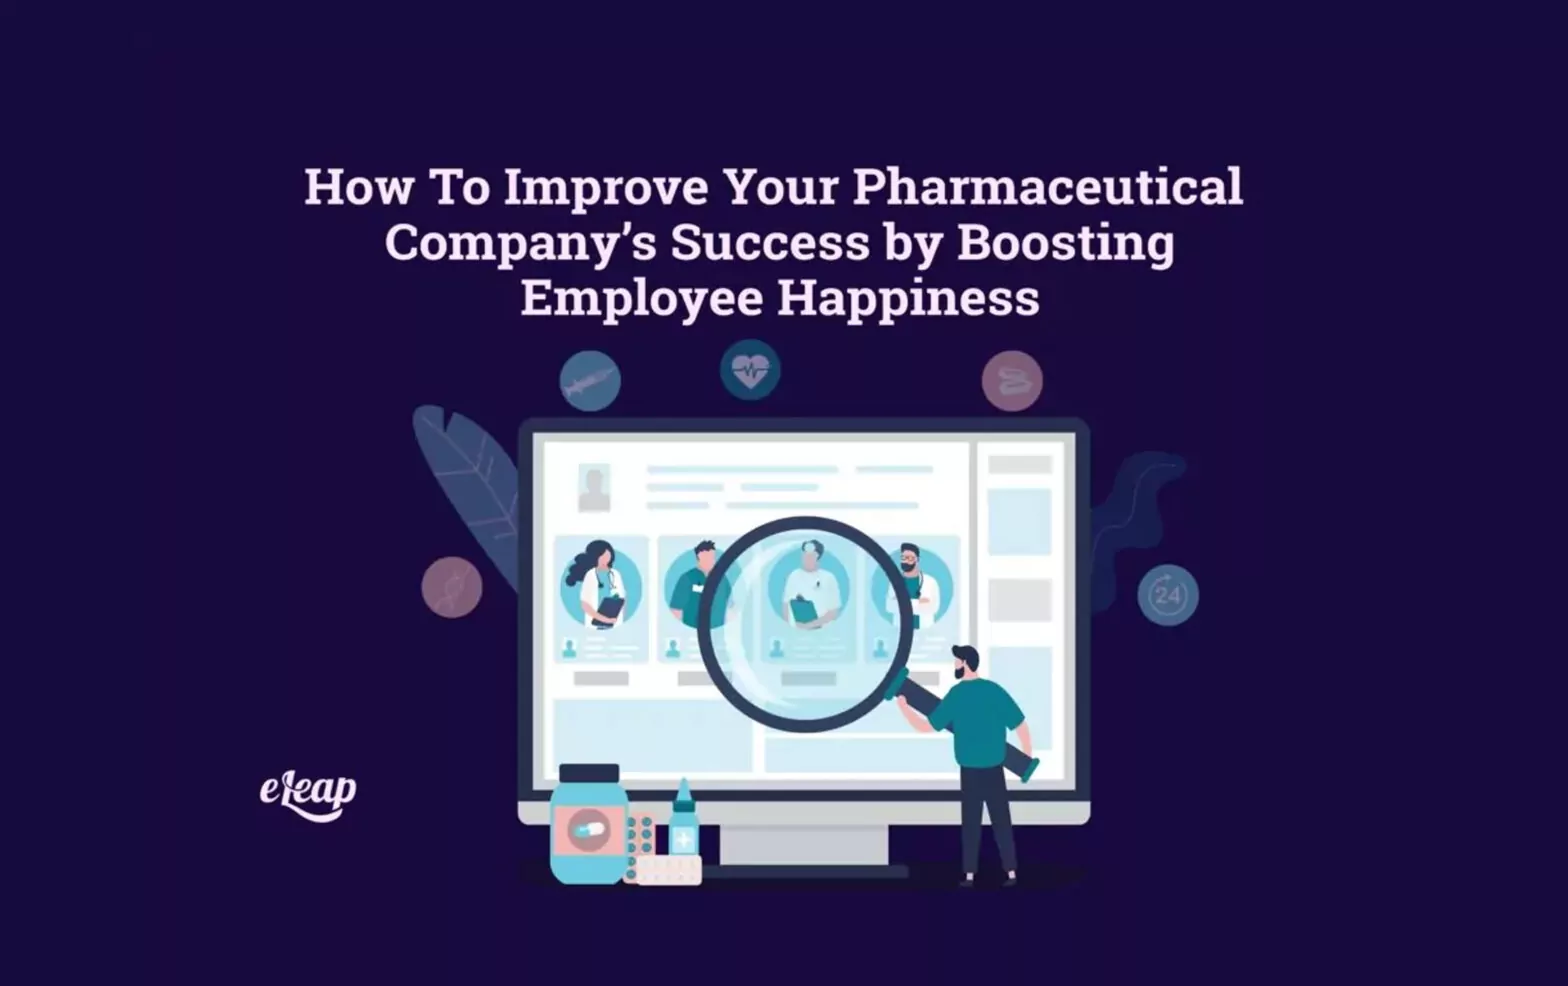 How To Improve Your Pharmaceutical Company’s Success by Boosting Employee Happiness